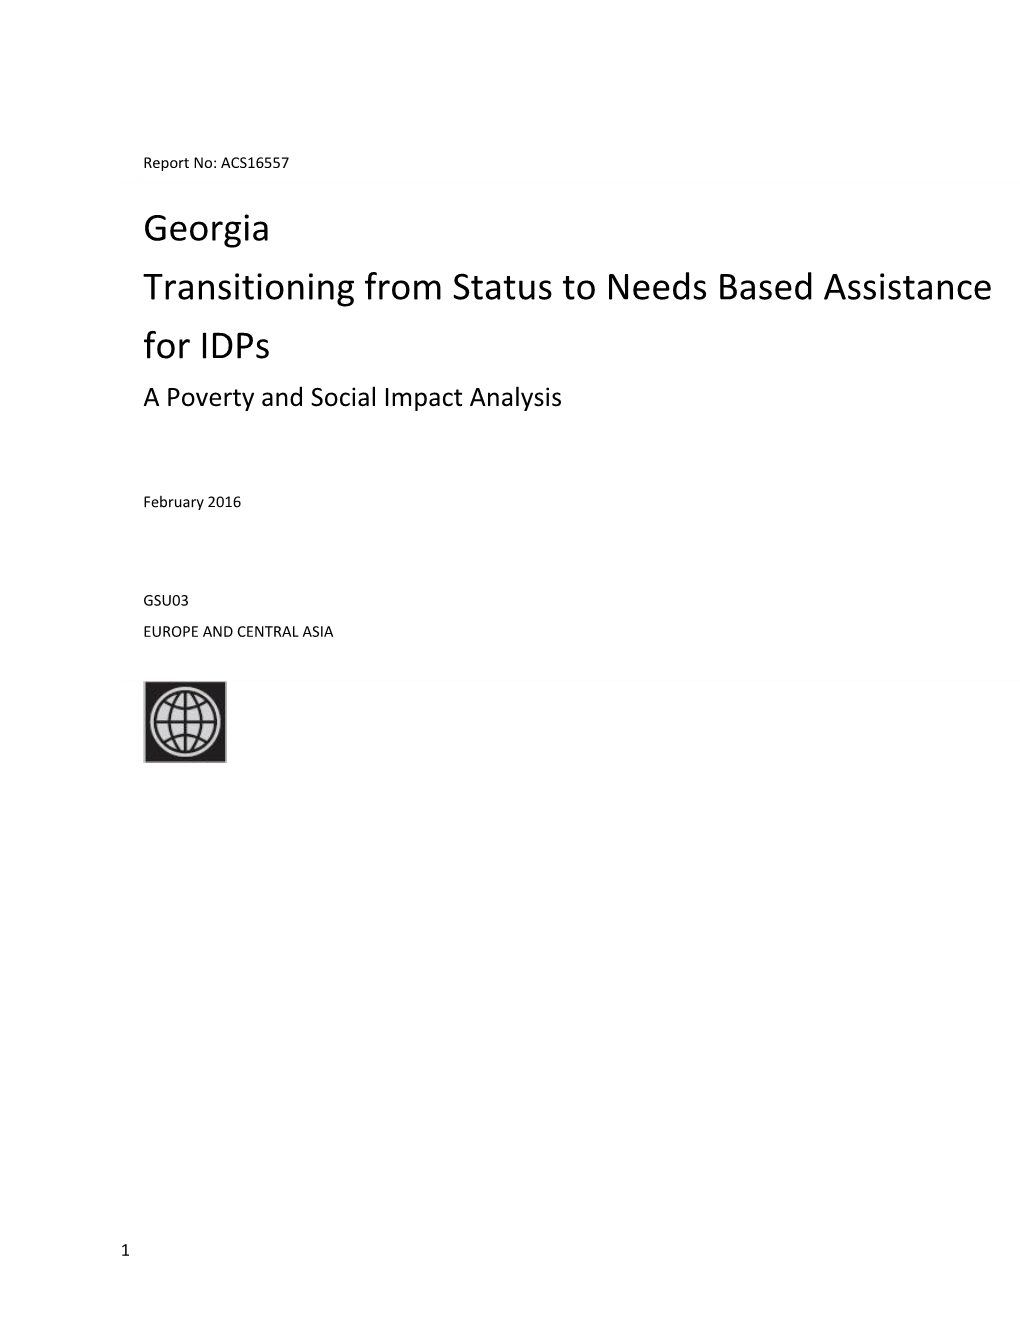 Transitioning from Status to Needs Based Assistance for Georgia Idps: a Poverty and Social